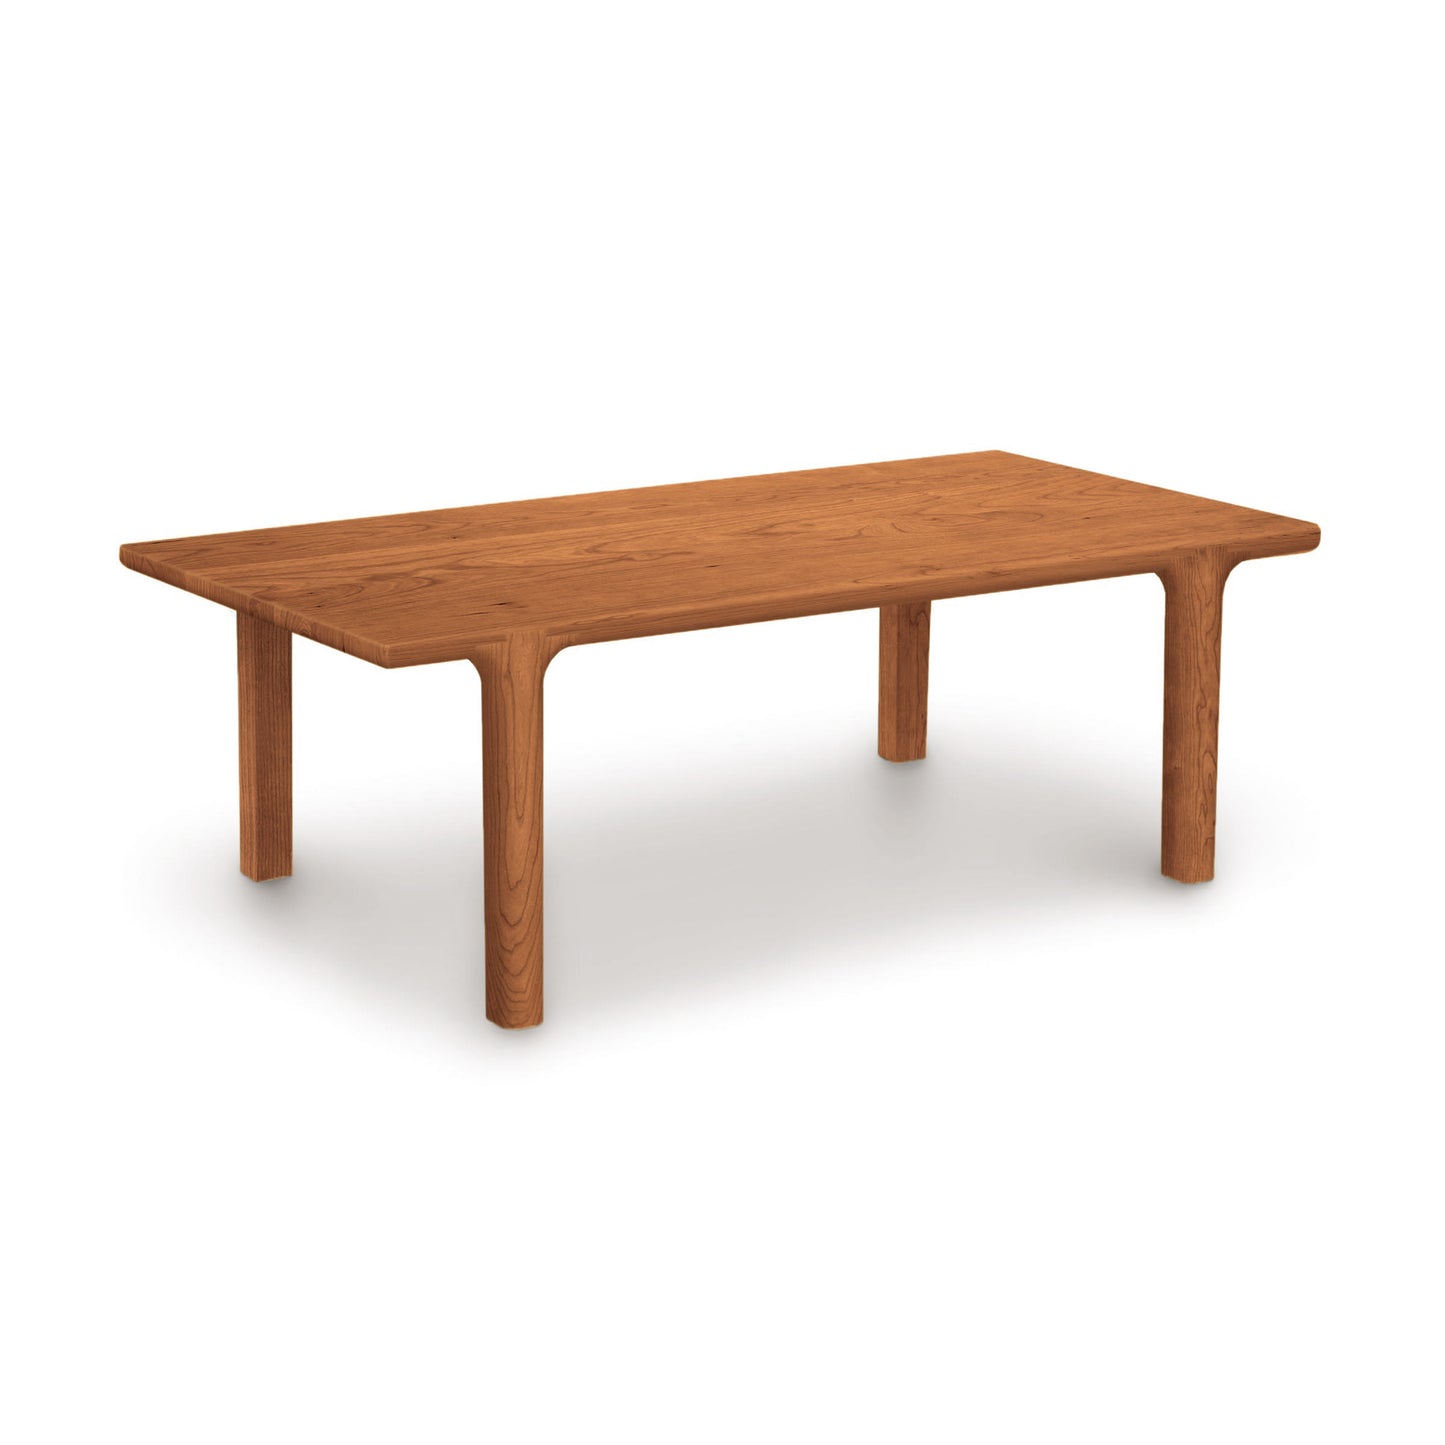 A Copeland Furniture Sierra Rectangular Coffee Table with two legs on a white background.